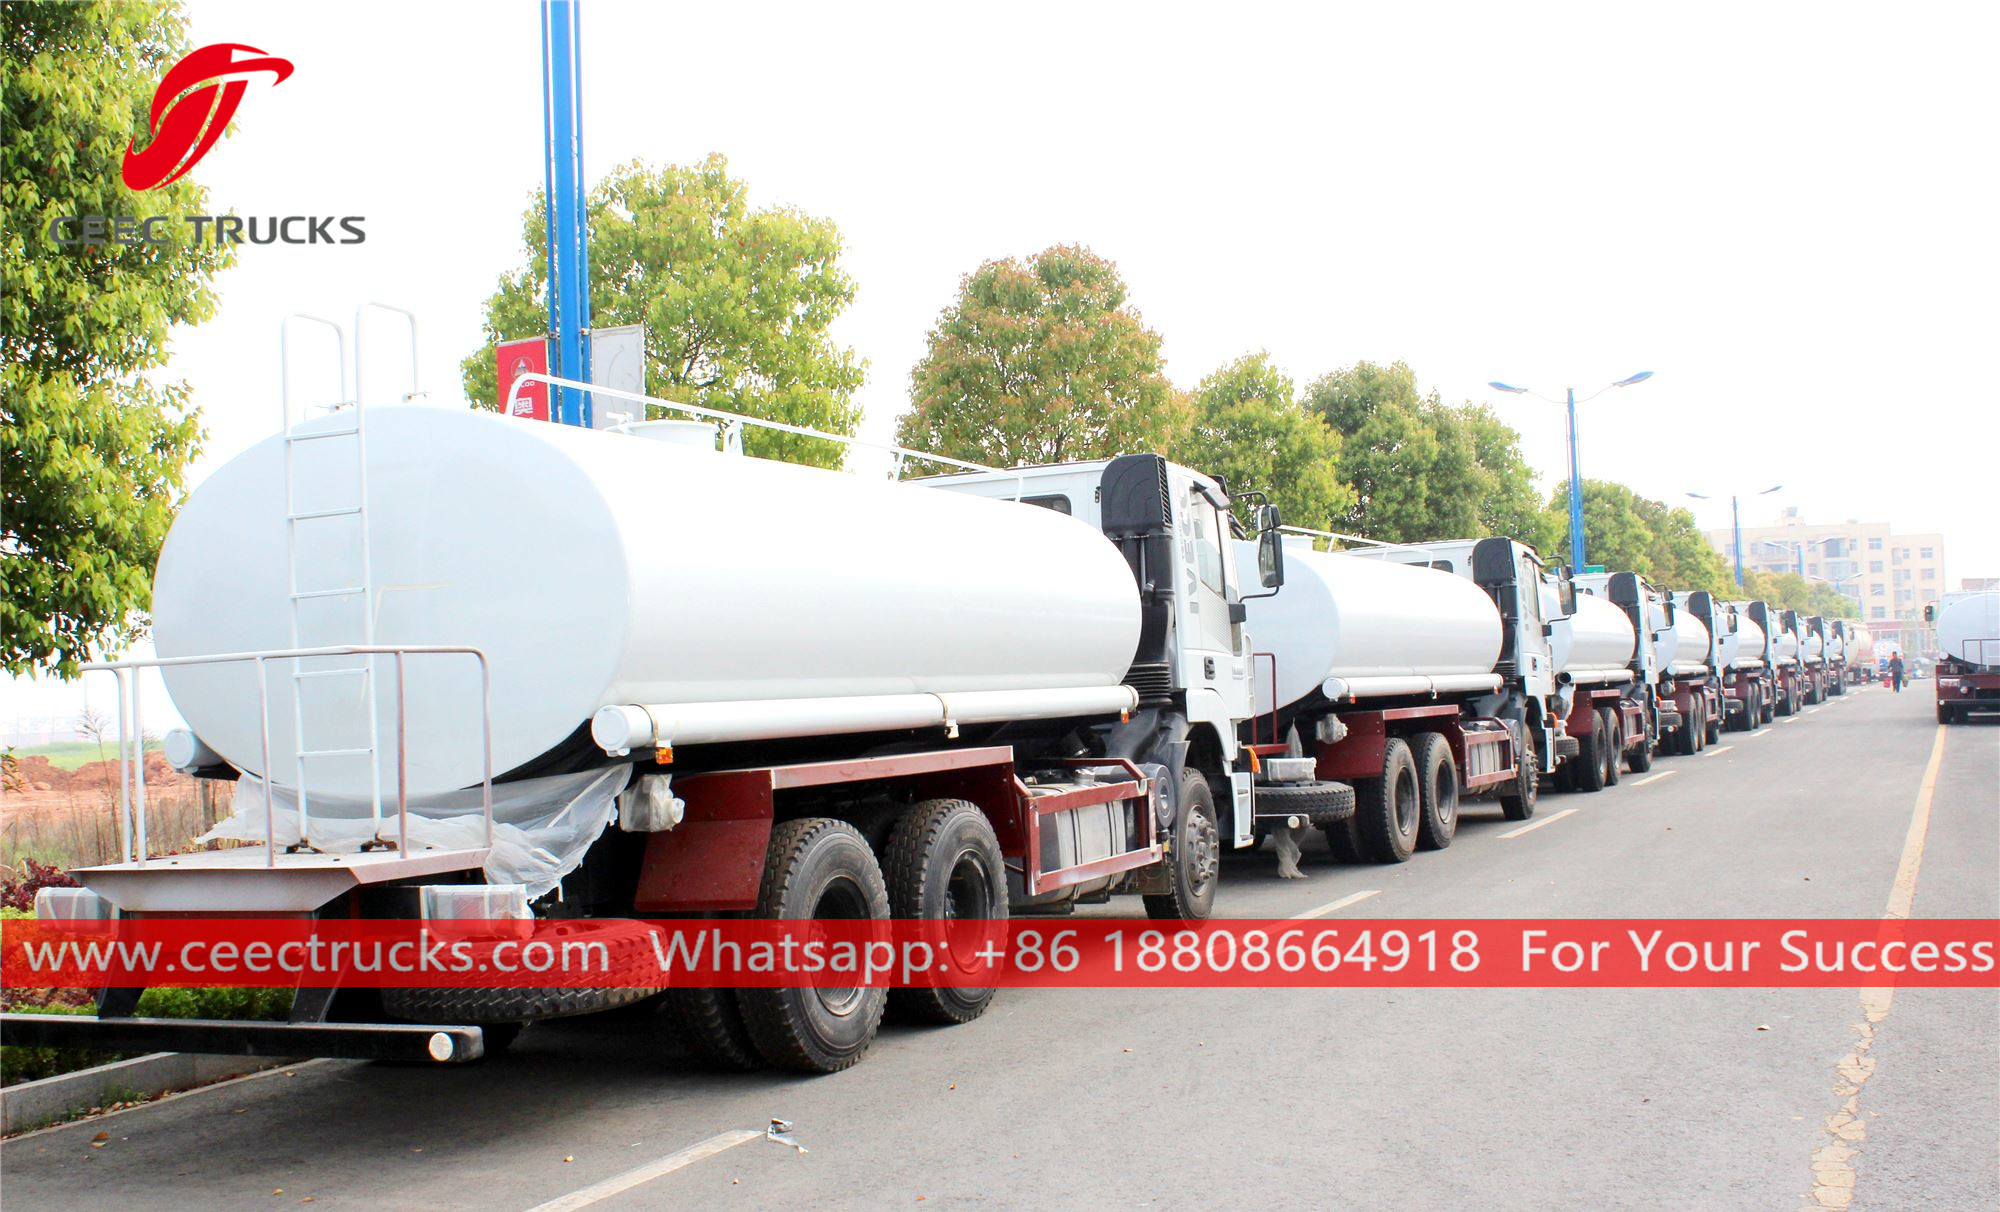 27 units water trucks are ready for delivery